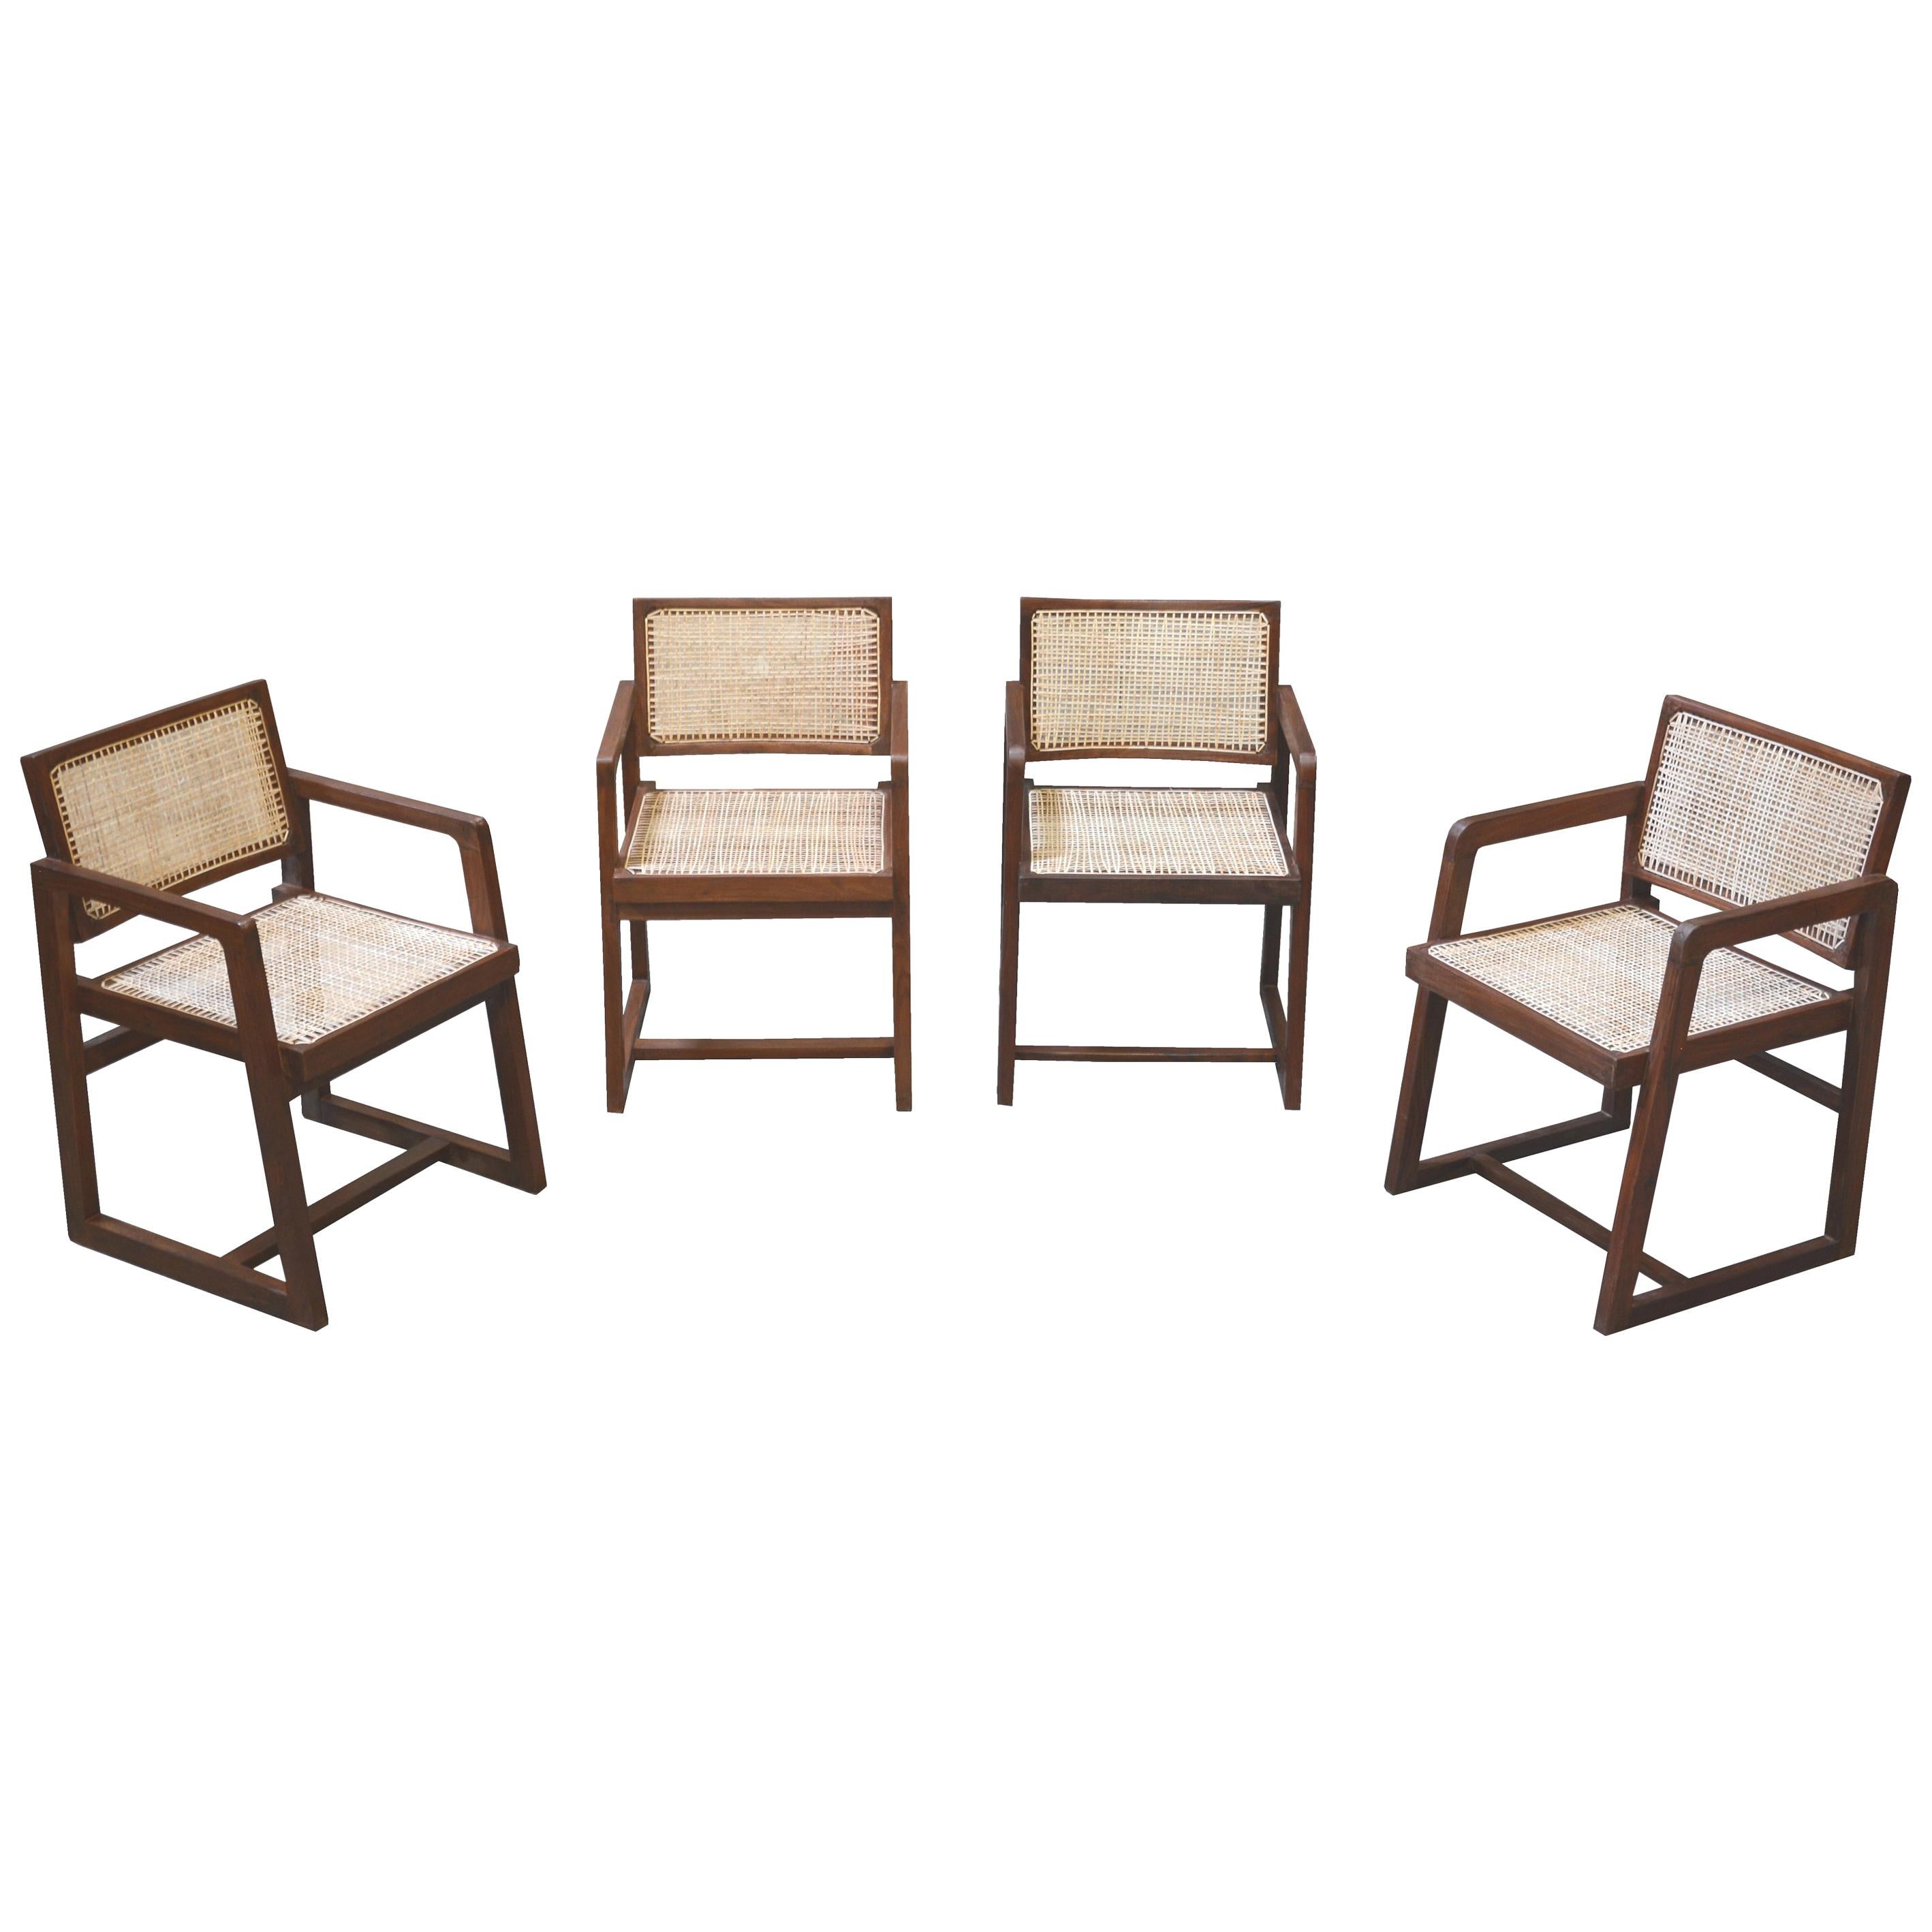 Pierre Jeanneret Rare set of 4 Cane Back Office Chairs with original Letterings For Sale